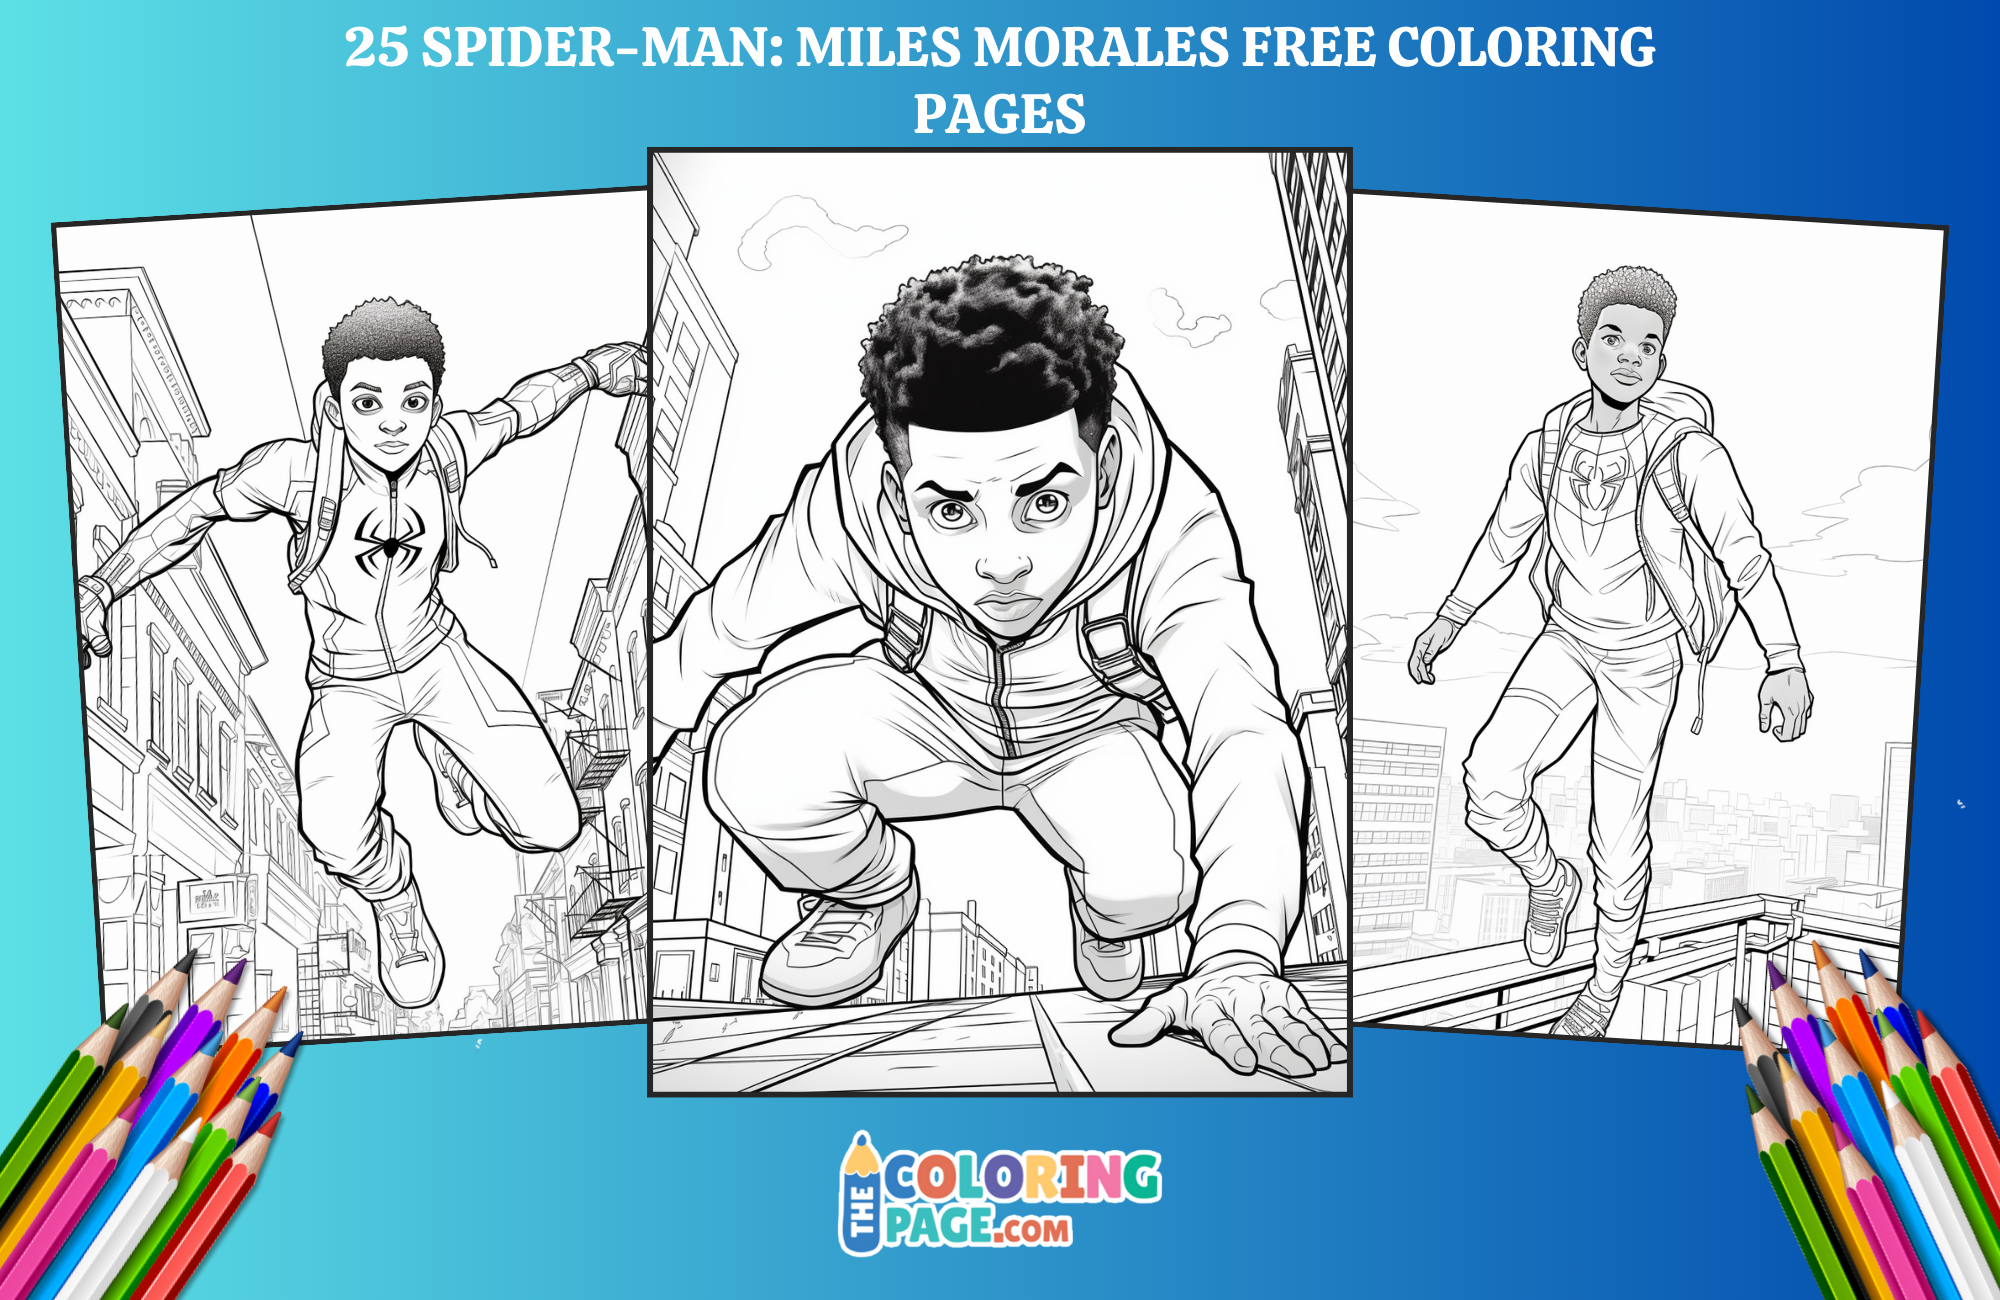 25 Spider-Man Miles Morales Coloring Pages for kids